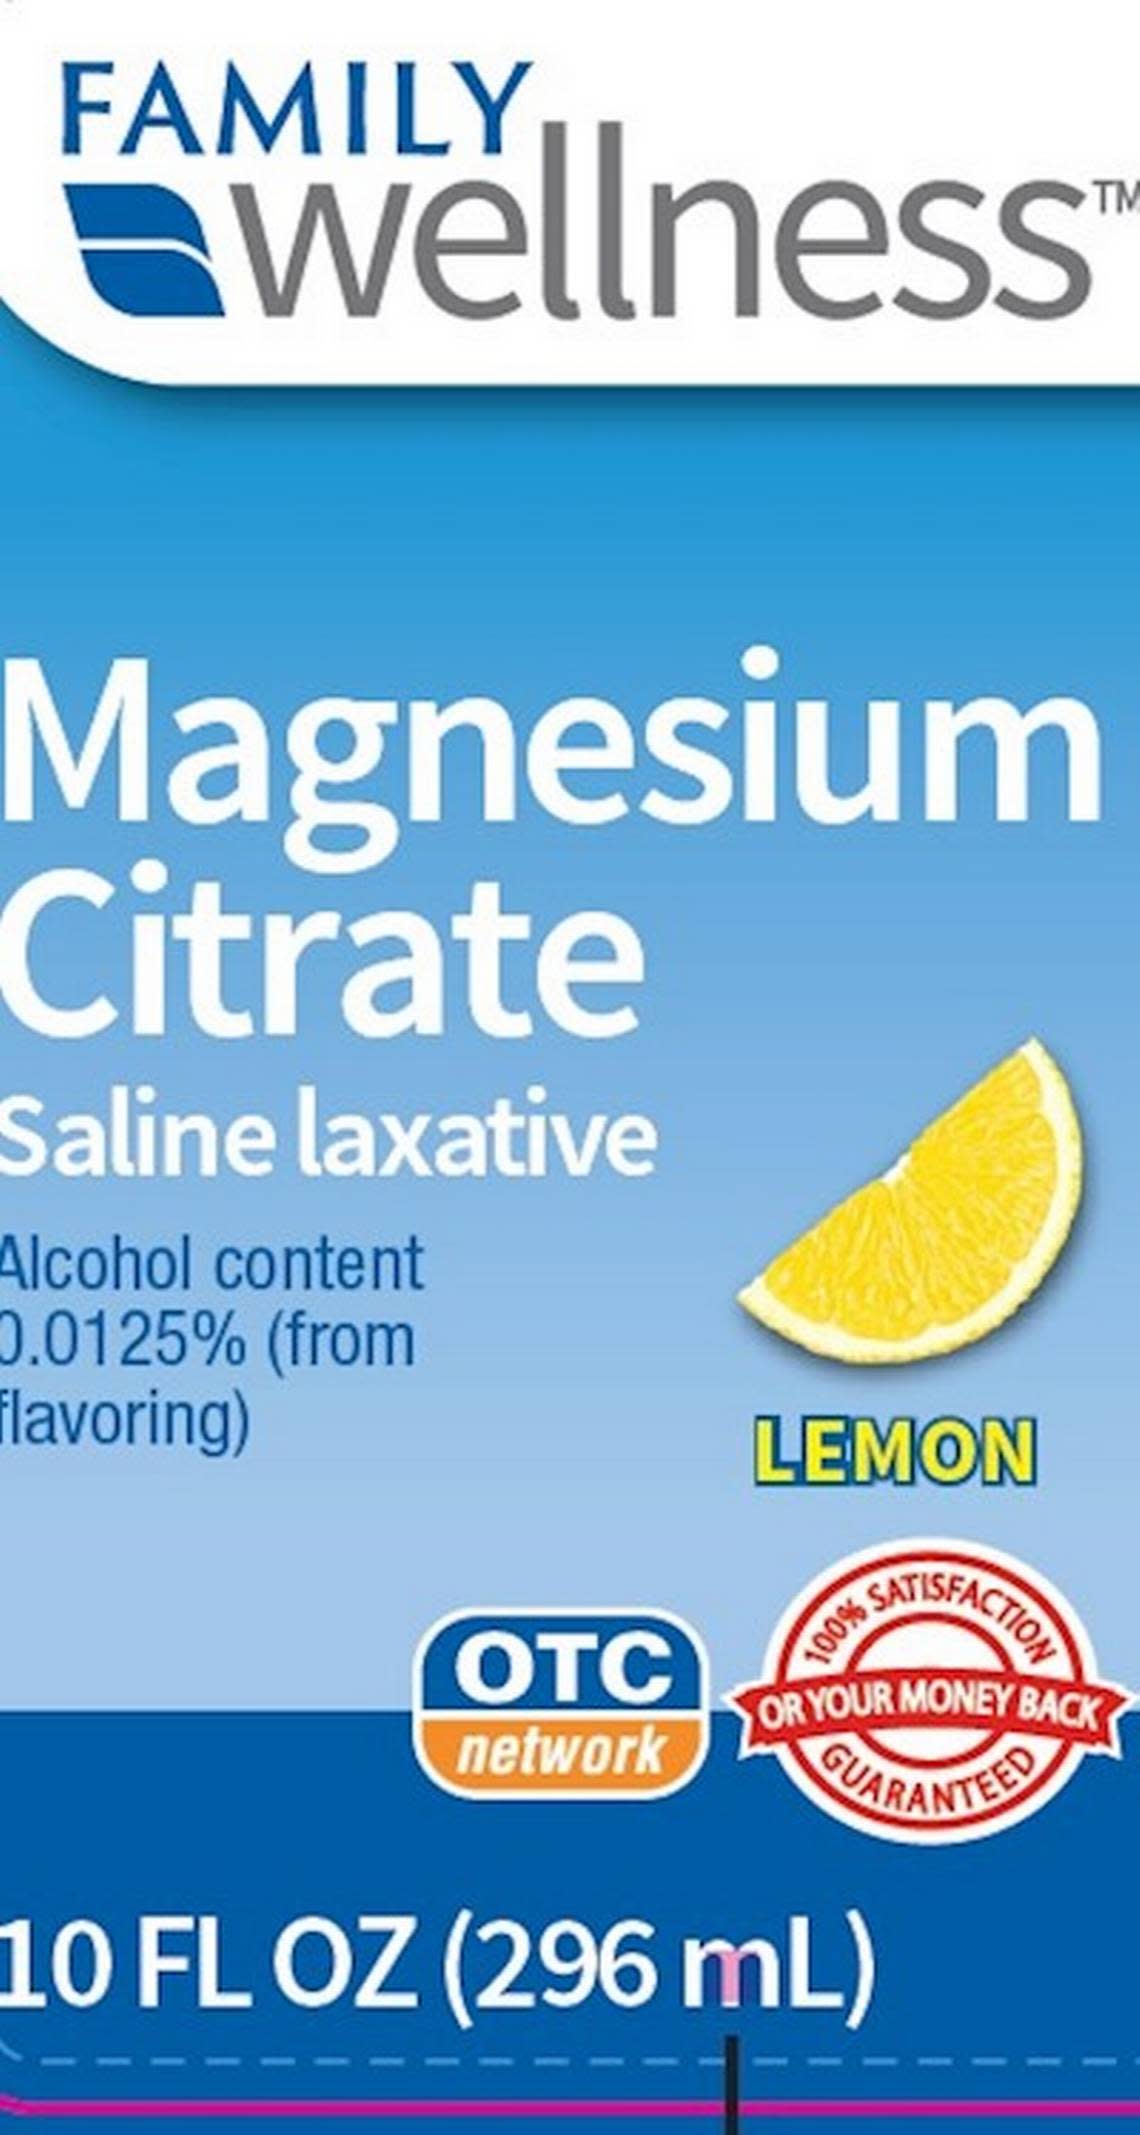 Family Wellness Magnesium Citrate, sold at Family Dollar, which is owned by Dollar Tree